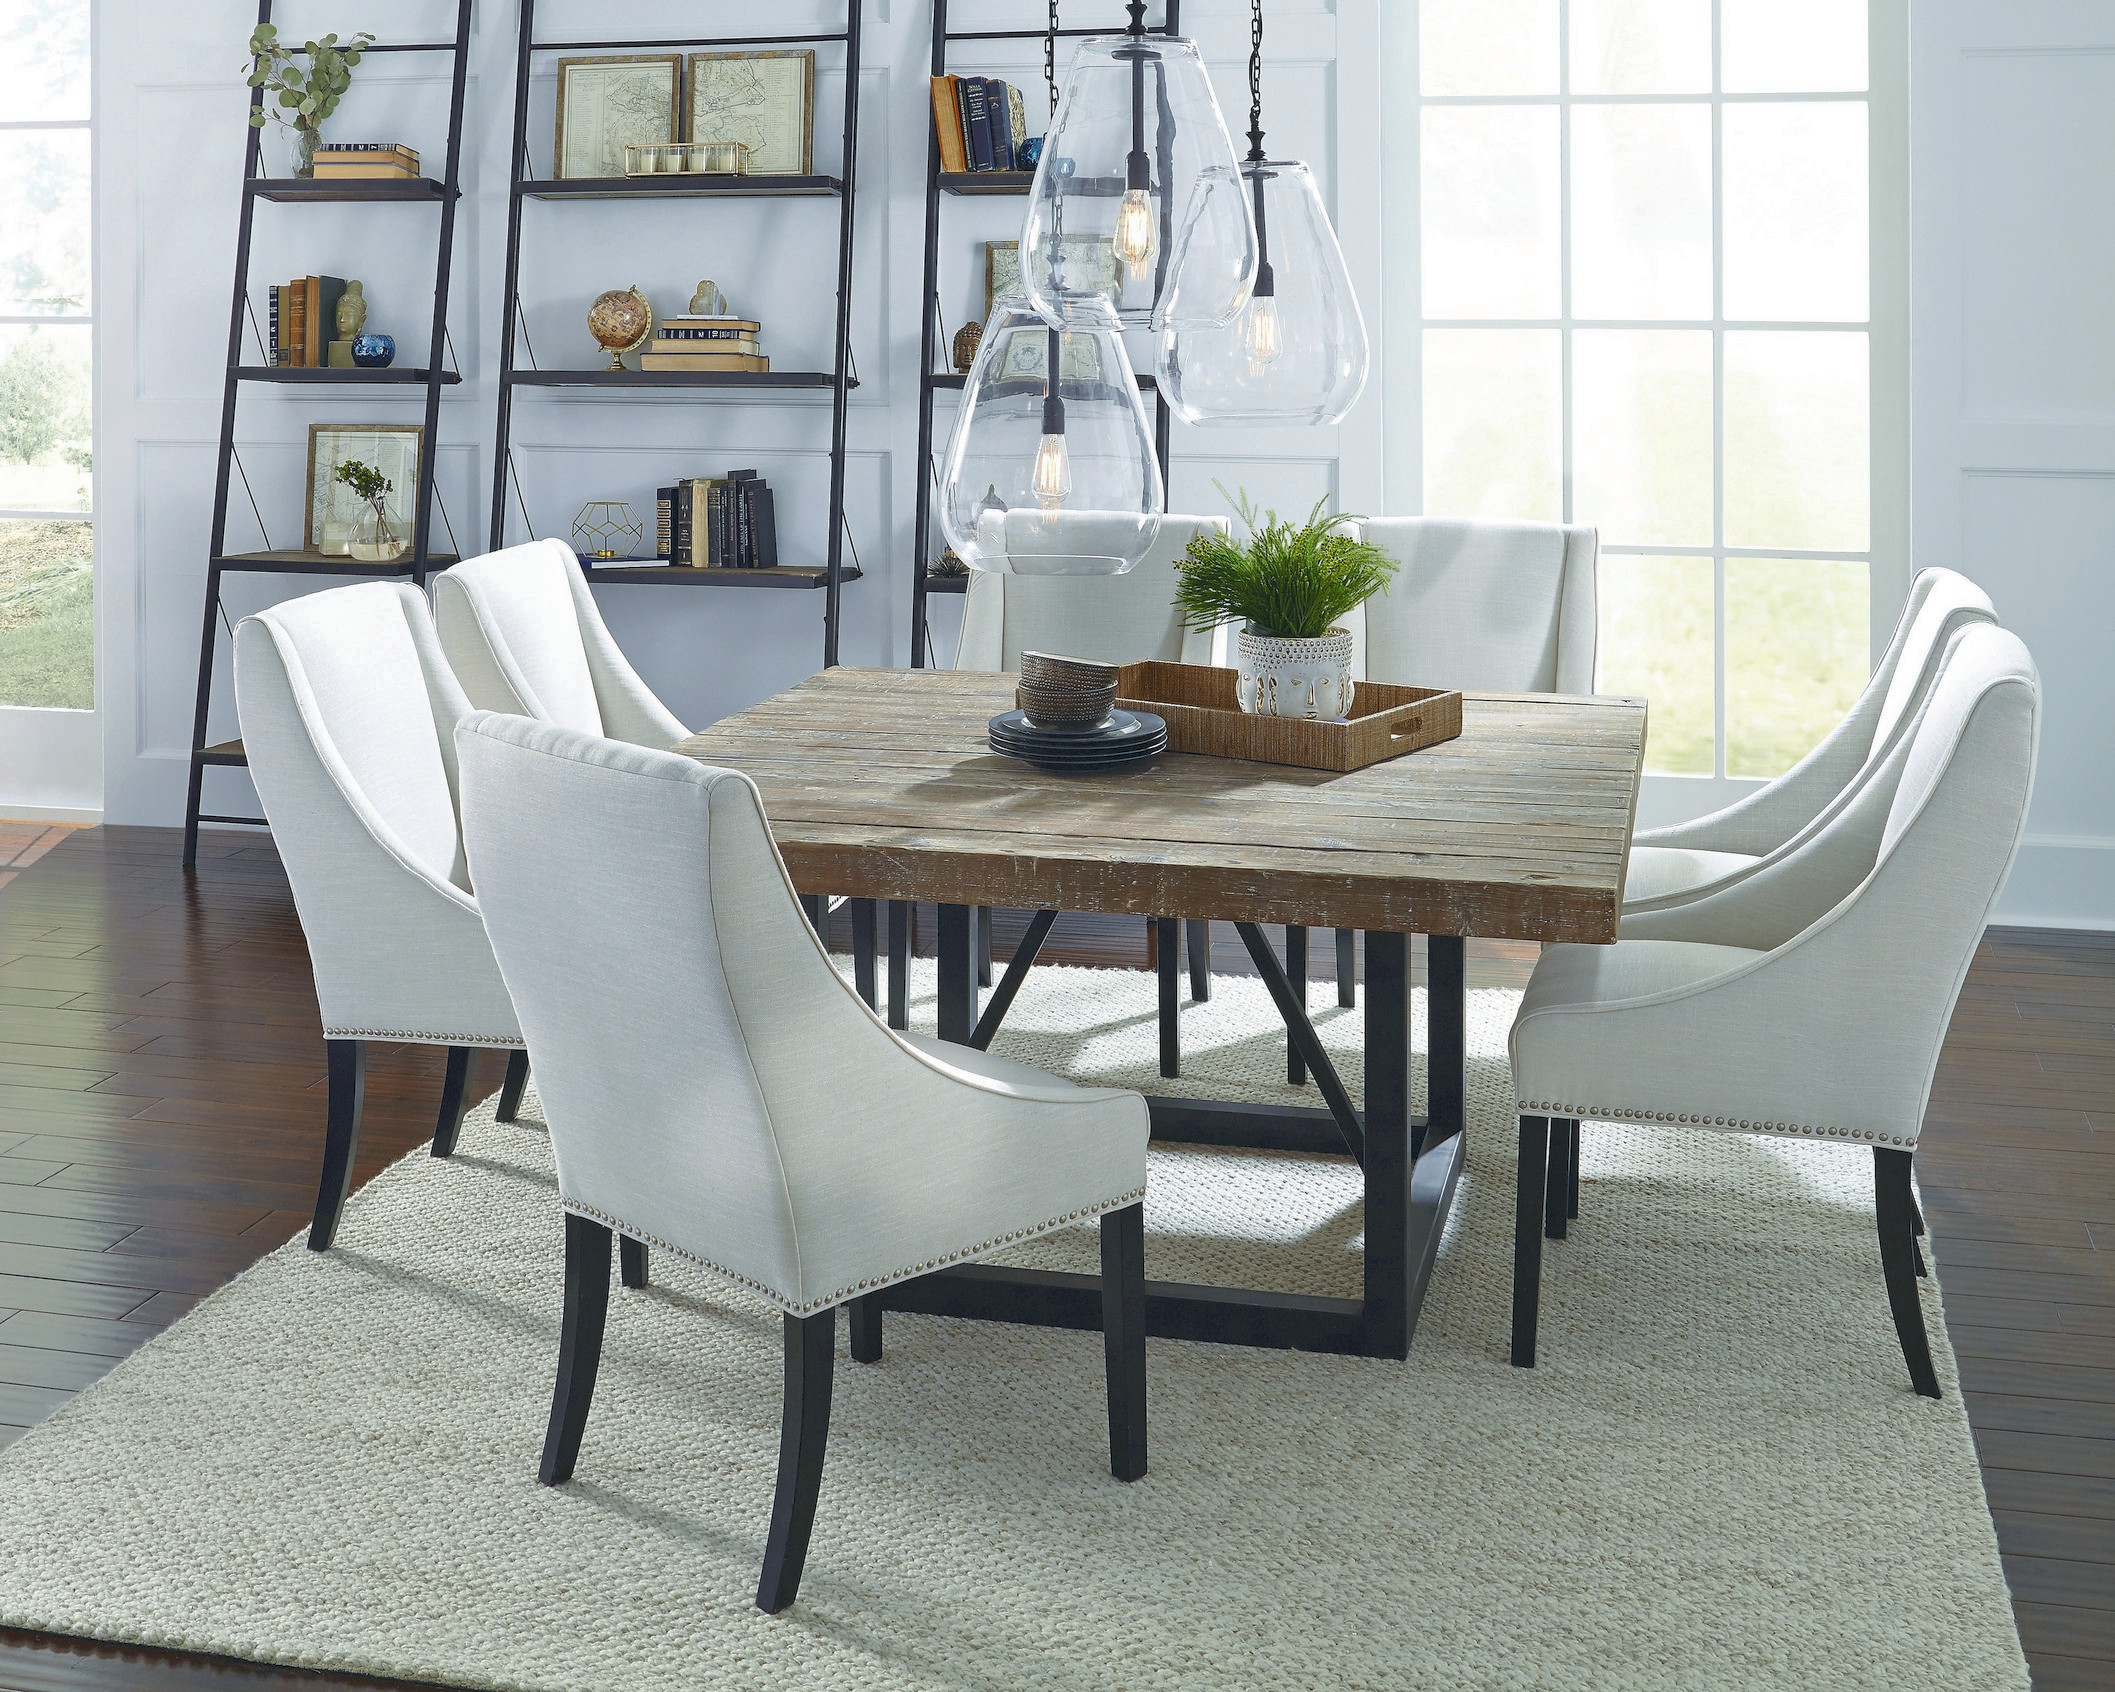 Mia 60 Inch Square Dining Table Rustic Dining Room Los Angeles By Kosas Houzz